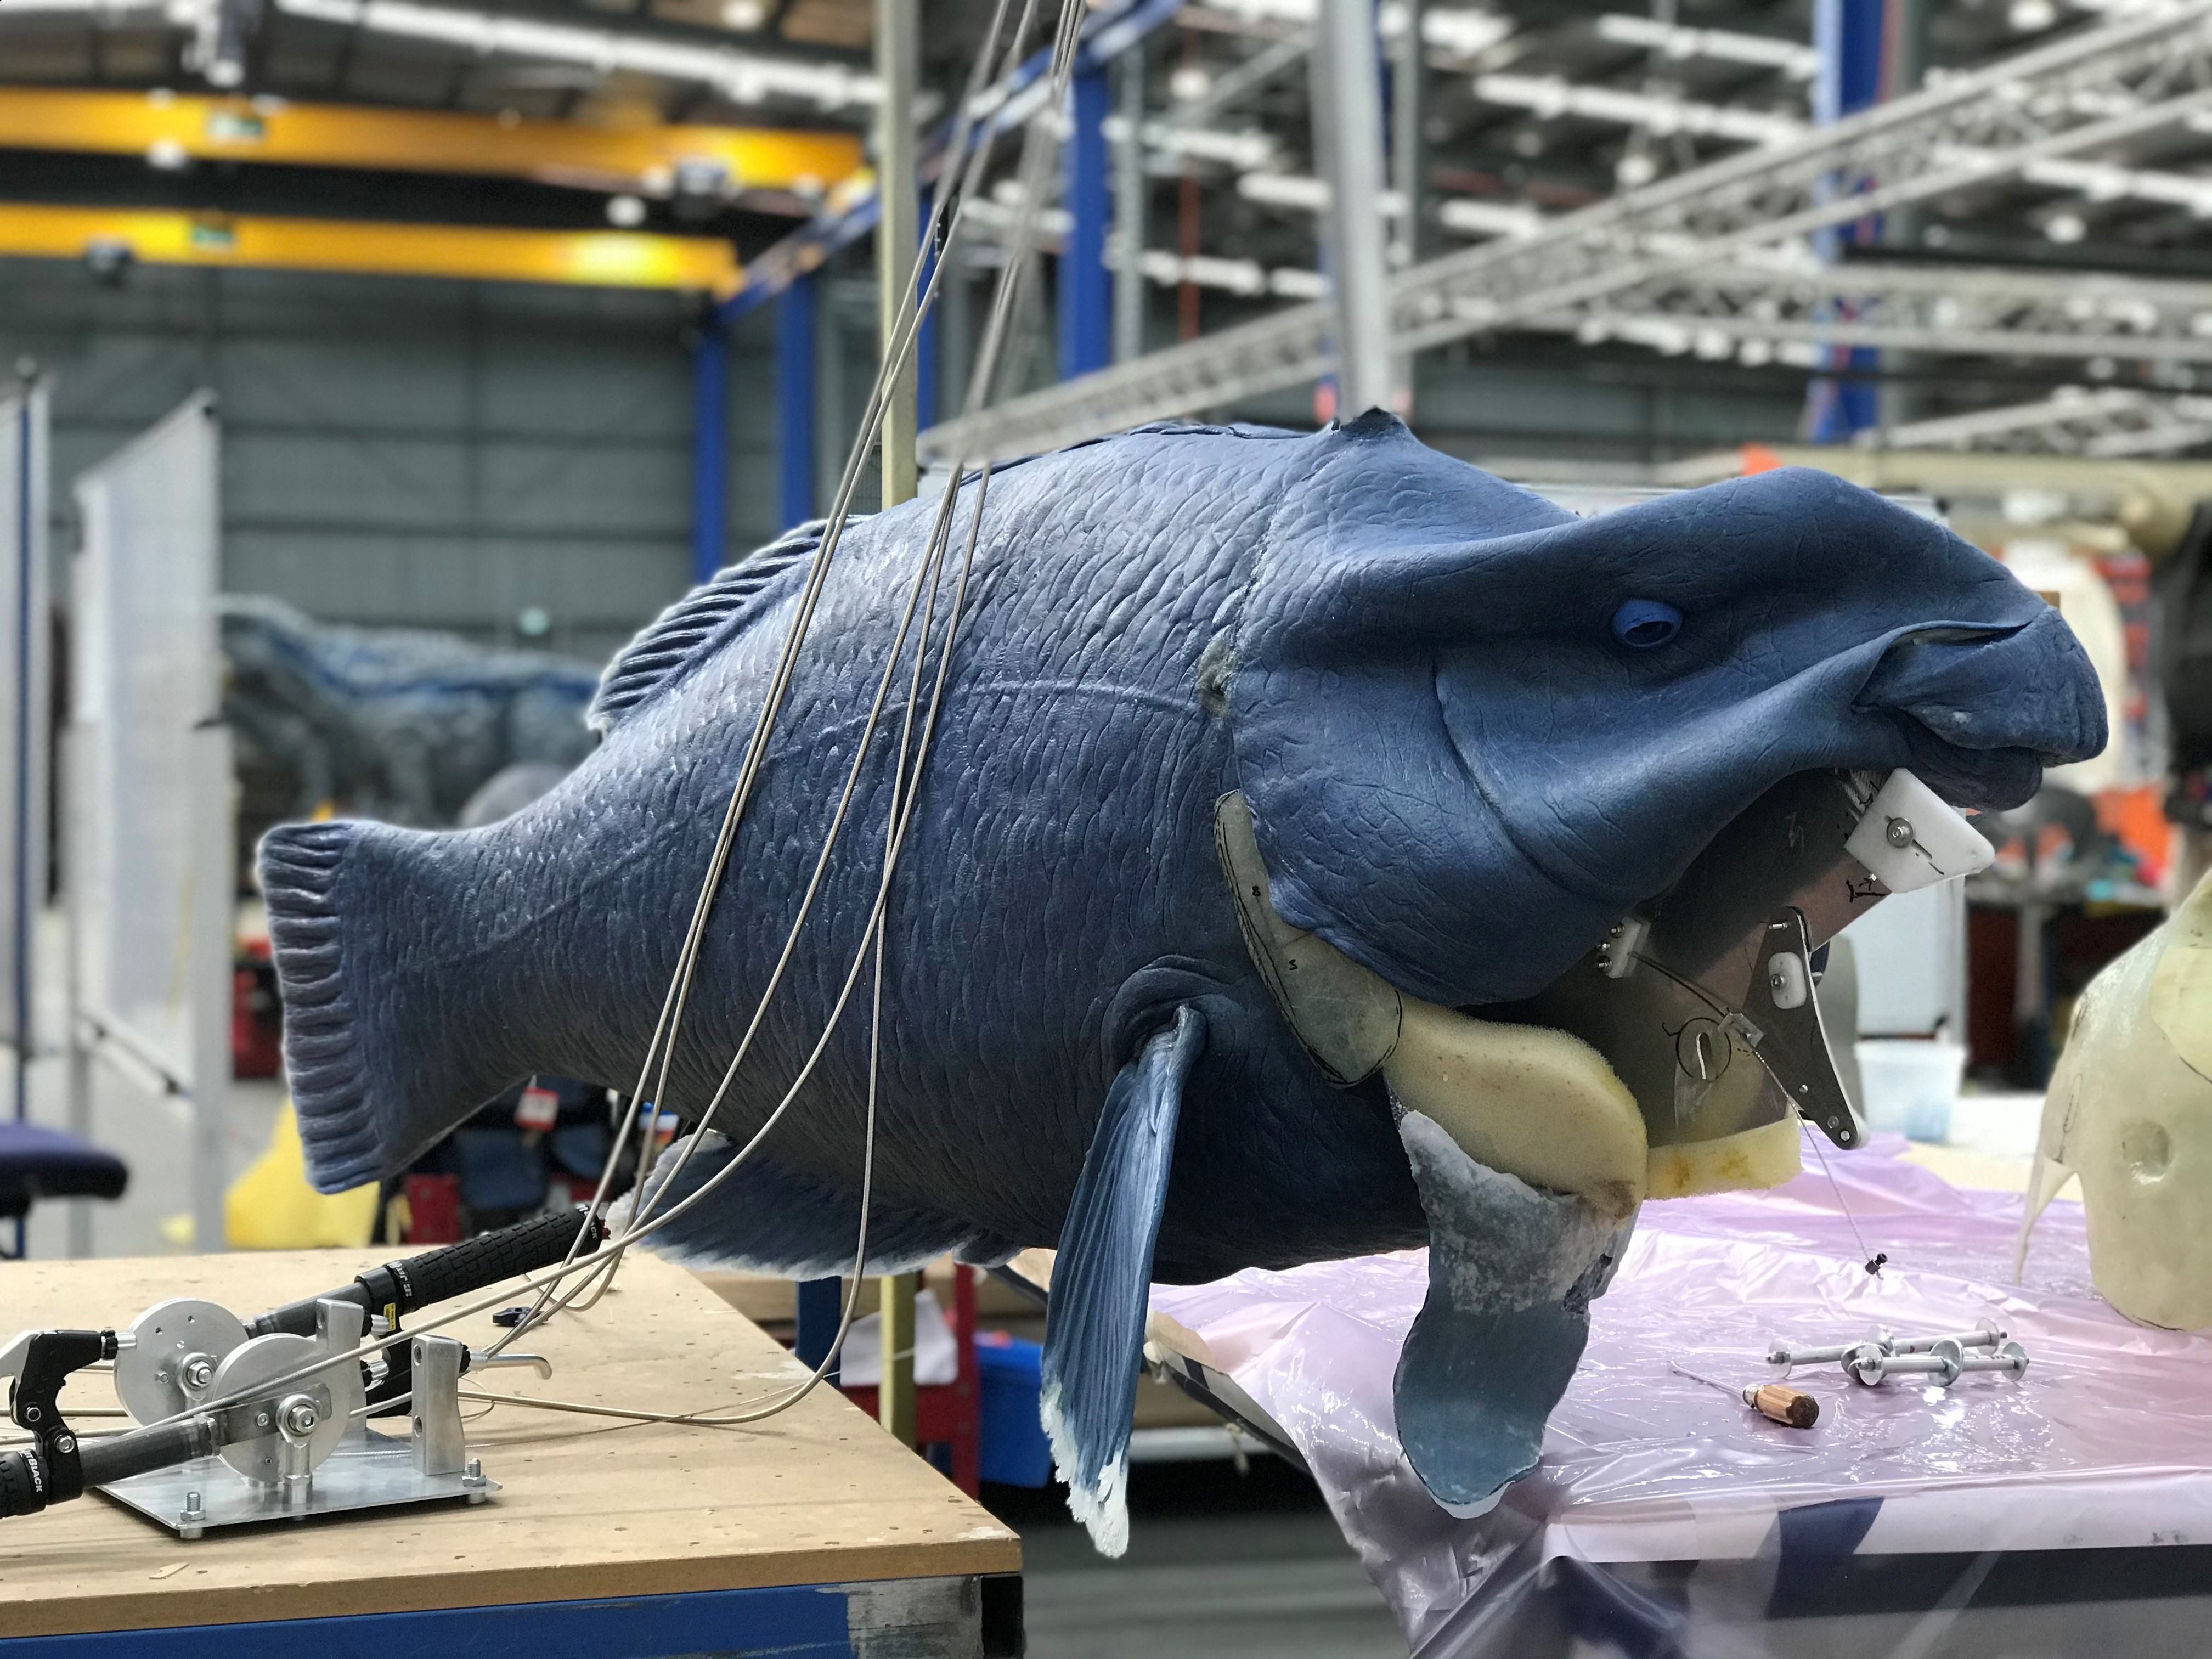 Making of fish puppet